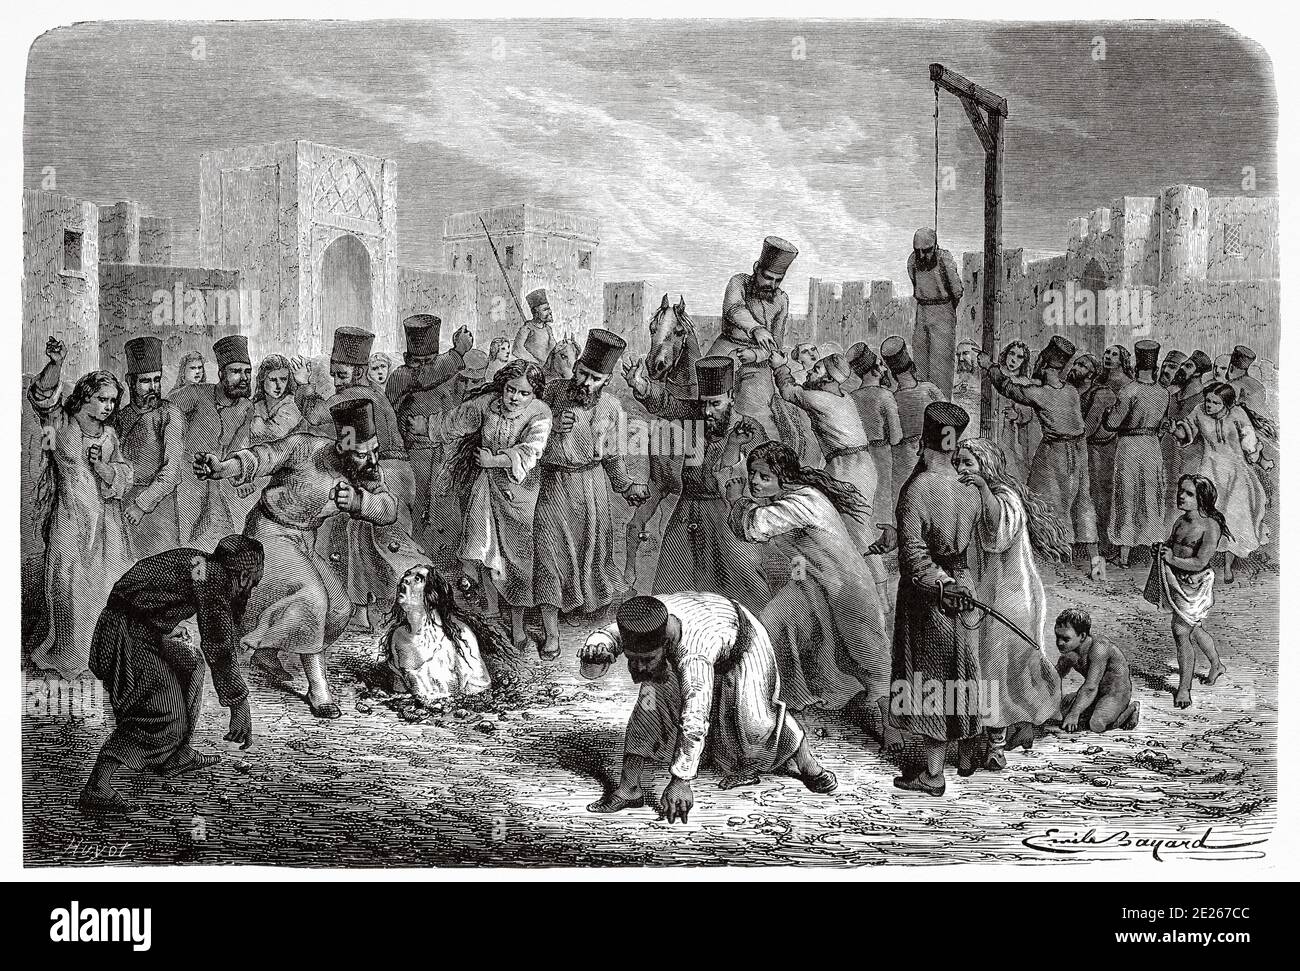 Punishment of adulterers, Khiva, Uzbekistan, from Travels in central Asia 1863 by Armin Vambery. Old engraving El Mundo en la Mano 1878 Stock Photo